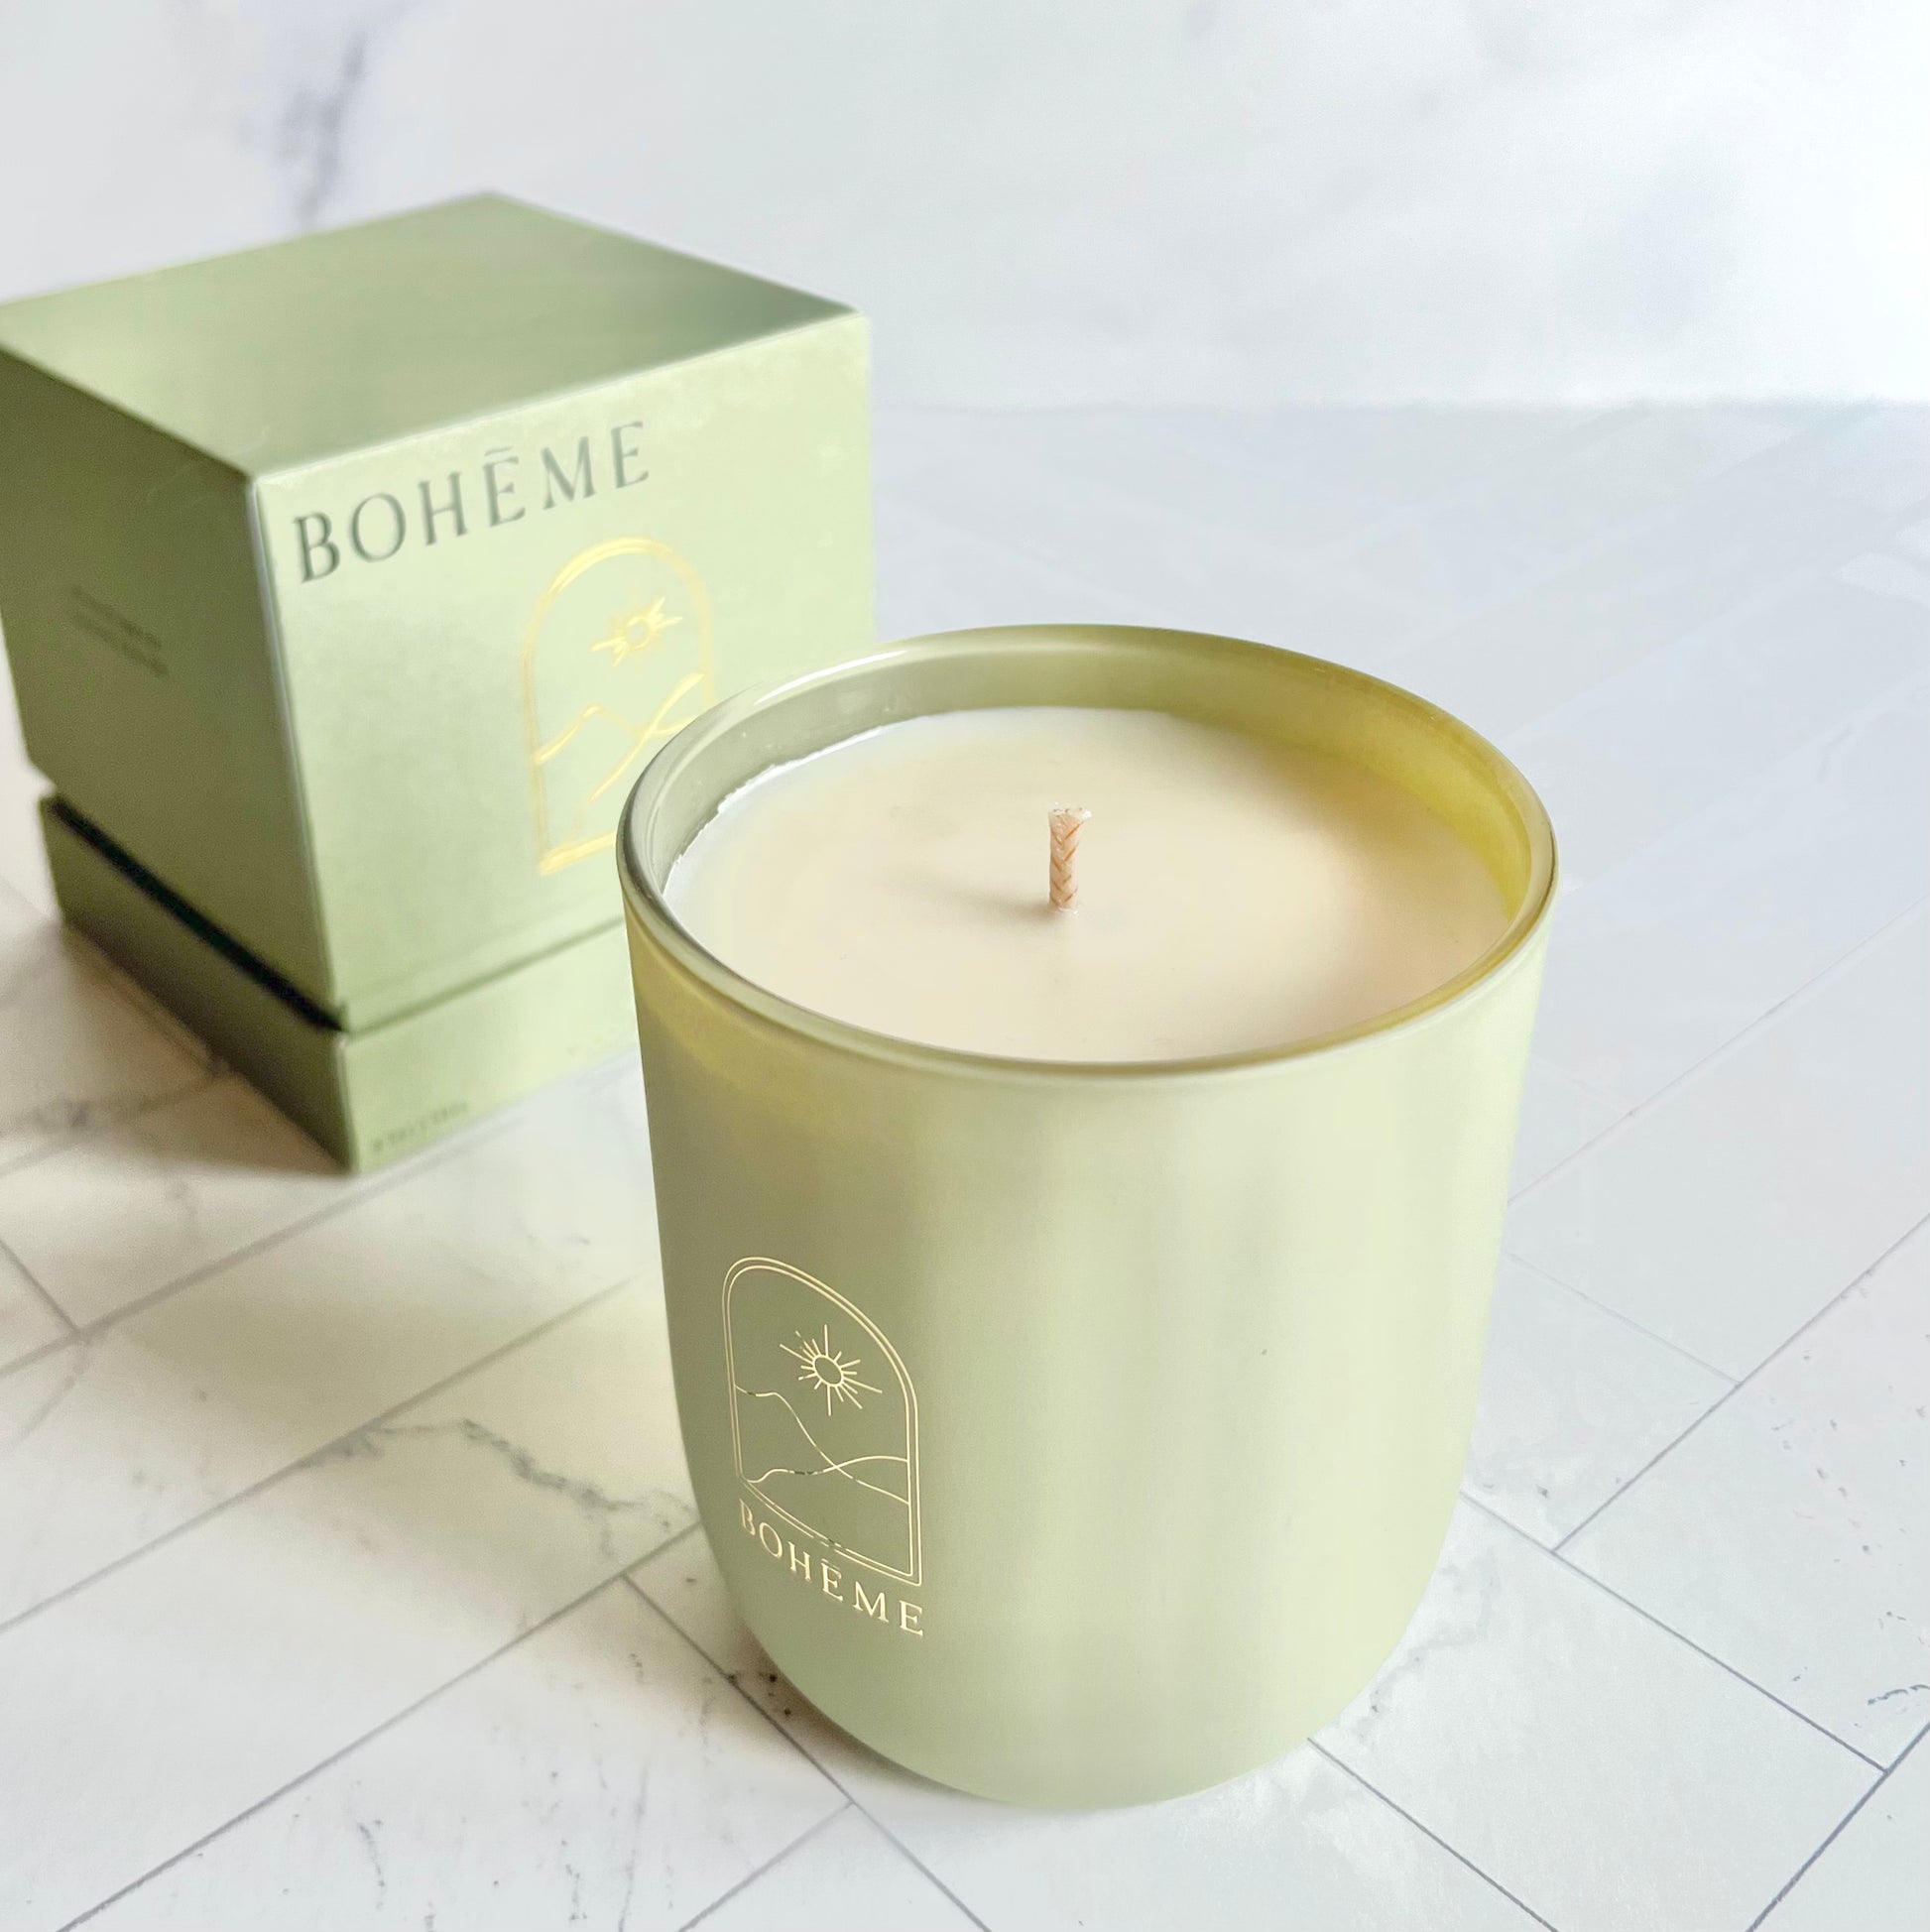 A light green candle with its box behind on a white surface